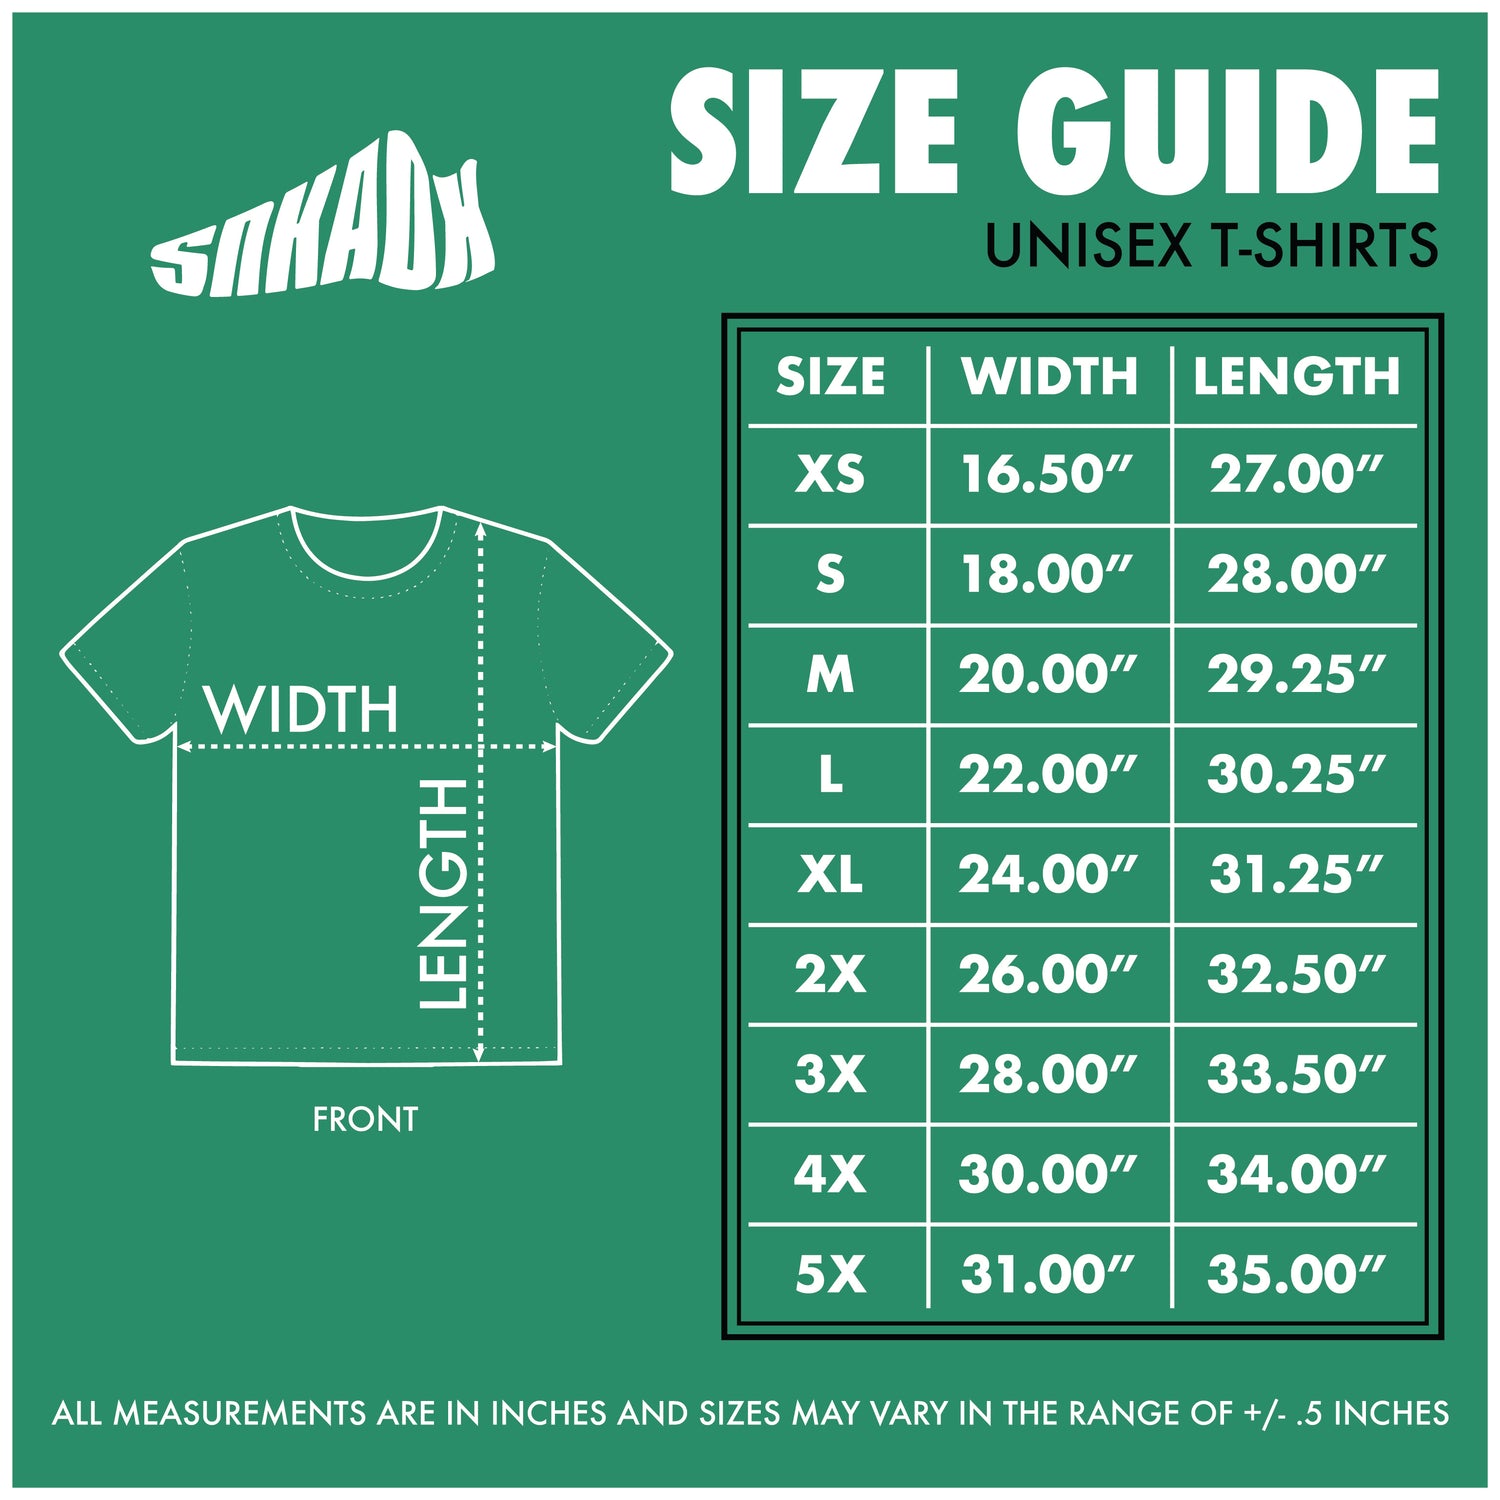 Size guide for sneaker match tees